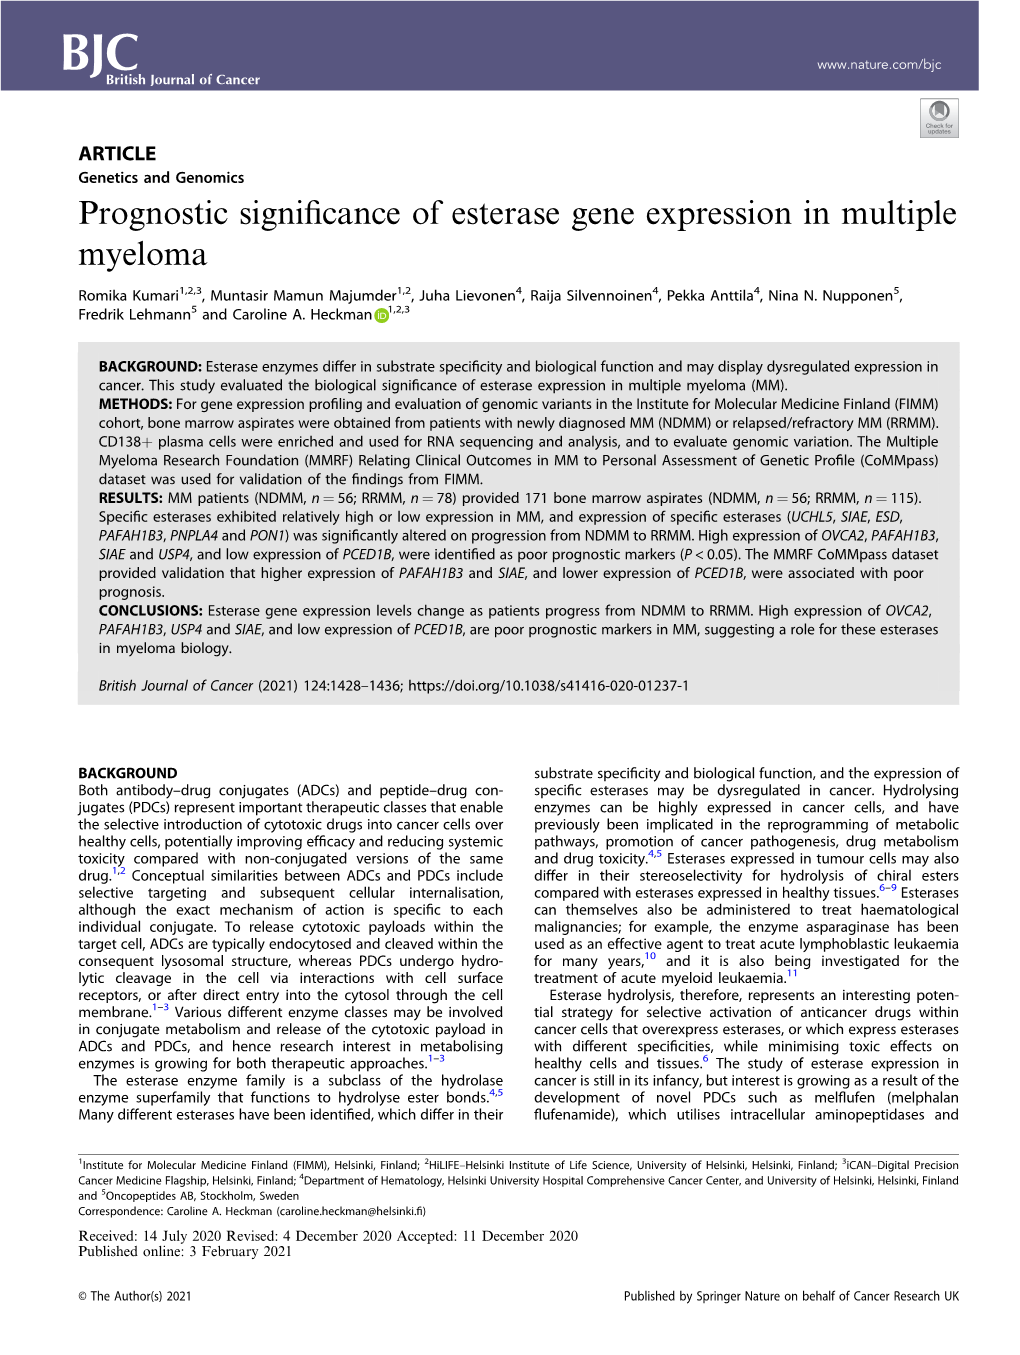 Prognostic Significance of Esterase Gene Expression in Multiple Myeloma